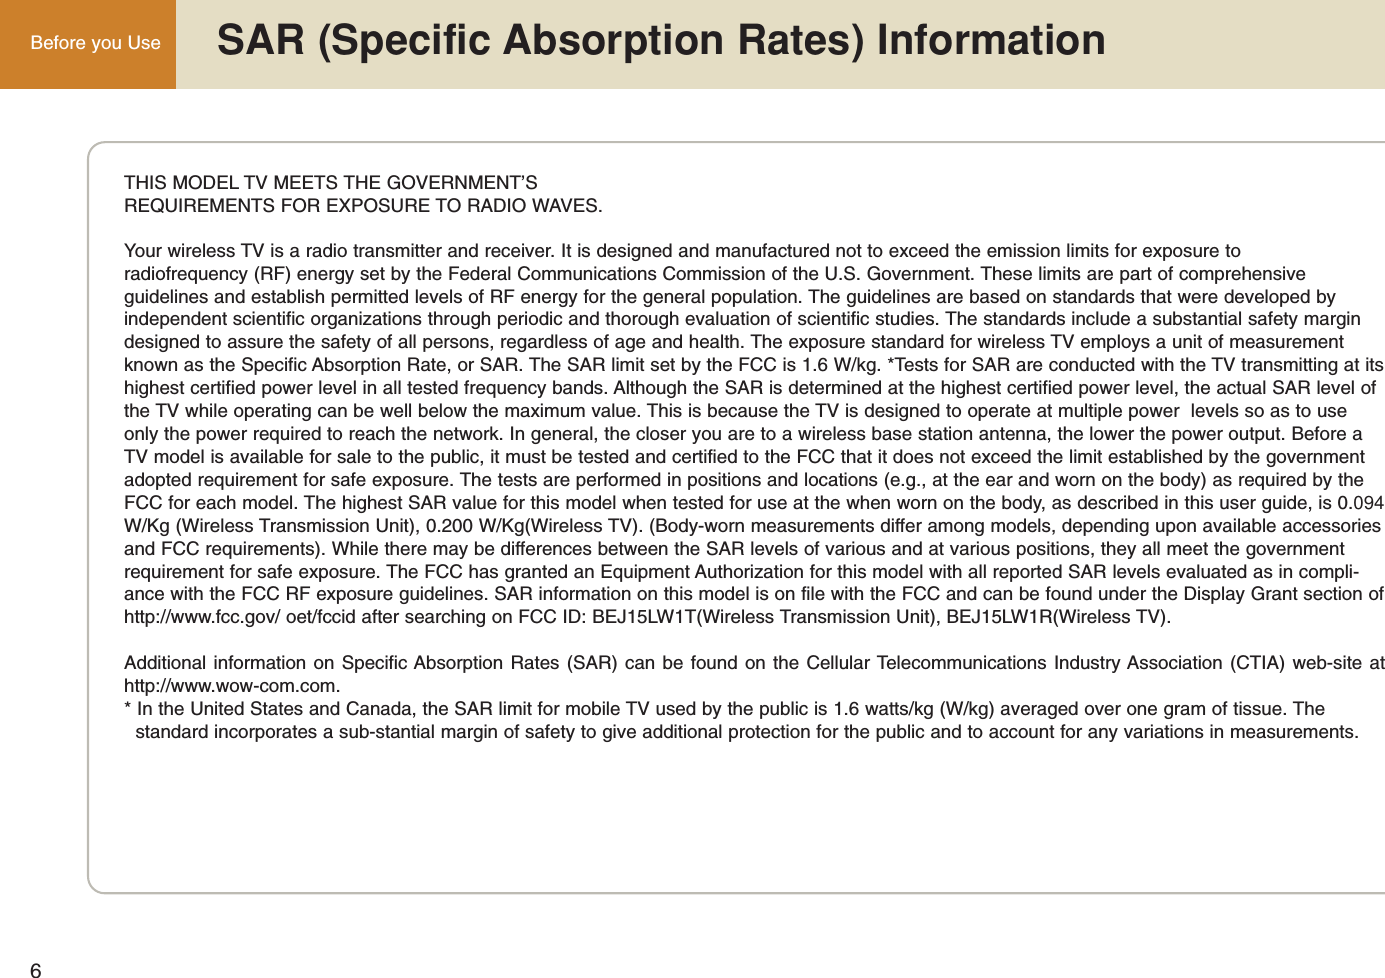 6Before you Use  SAR (Specific Absorption Rates) InformationTHIS MODEL TV MEETS THE GOVERNMENT’SREQUIREMENTS FOR EXPOSURE TO RADIO WAVES.Your wireless TV is a radio transmitter and receiver. It is designed and manufactured not to exceed the emission limits for exposure to radiofrequency (RF) energy set by the Federal Communications Commission of the U.S. Government. These limits are part of comprehensiveguidelines and establish permitted levels of RF energy for the general population. The guidelines are based on standards that were developed by independent scientific organizations through periodic and thorough evaluation of scientific studies. The standards include a substantial safety margindesigned to assure the safety of all persons, regardless of age and health. The exposure standard for wireless TV employs a unit of measurementknown as the Specific Absorption Rate, or SAR. The SAR limit set by the FCC is 1.6 W/kg. *Tests for SAR are conducted with the TV transmitting at itshighest certified power level in all tested frequency bands. Although the SAR is determined at the highest certified power level, the actual SAR level ofthe TV while operating can be well below the maximum value. This is because the TV is designed to operate at multiple power  levels so as to useonly the power required to reach the network. In general, the closer you are to a wireless base station antenna, the lower the power output. Before aTV model is available for sale to the public, it must be tested and certified to the FCC that it does not exceed the limit established by the governmentadopted requirement for safe exposure. The tests are performed in positions and locations (e.g., at the ear and worn on the body) as required by theFCC for each model. The highest SAR value for this model when tested for use at the when worn on the body, as described in this user guide, is 0.094W/Kg (Wireless Transmission Unit), 0.200 W/Kg(Wireless TV). (Body-worn measurements differ among models, depending upon available accessoriesand FCC requirements). While there may be differences between the SAR levels of various and at various positions, they all meet the governmentrequirement for safe exposure. The FCC has granted an Equipment Authorization for this model with all reported SAR levels evaluated as in compli-ance with the FCC RF exposure guidelines. SAR information on this model is on file with the FCC and can be found under the Display Grant section ofhttp://www.fcc.gov/ oet/fccid after searching on FCC ID: BEJ15LW1T(Wireless Transmission Unit), BEJ15LW1R(Wireless TV).Additional information on Specific Absorption Rates (SAR) can be found on the Cellular Telecommunications Industry Association (CTIA) web-site athttp://www.wow-com.com.* In the United States and Canada, the SAR limit for mobile TV used by the public is 1.6 watts/kg (W/kg) averaged over one gram of tissue. The standard incorporates a sub-stantial margin of safety to give additional protection for the public and to account for any variations in measurements.